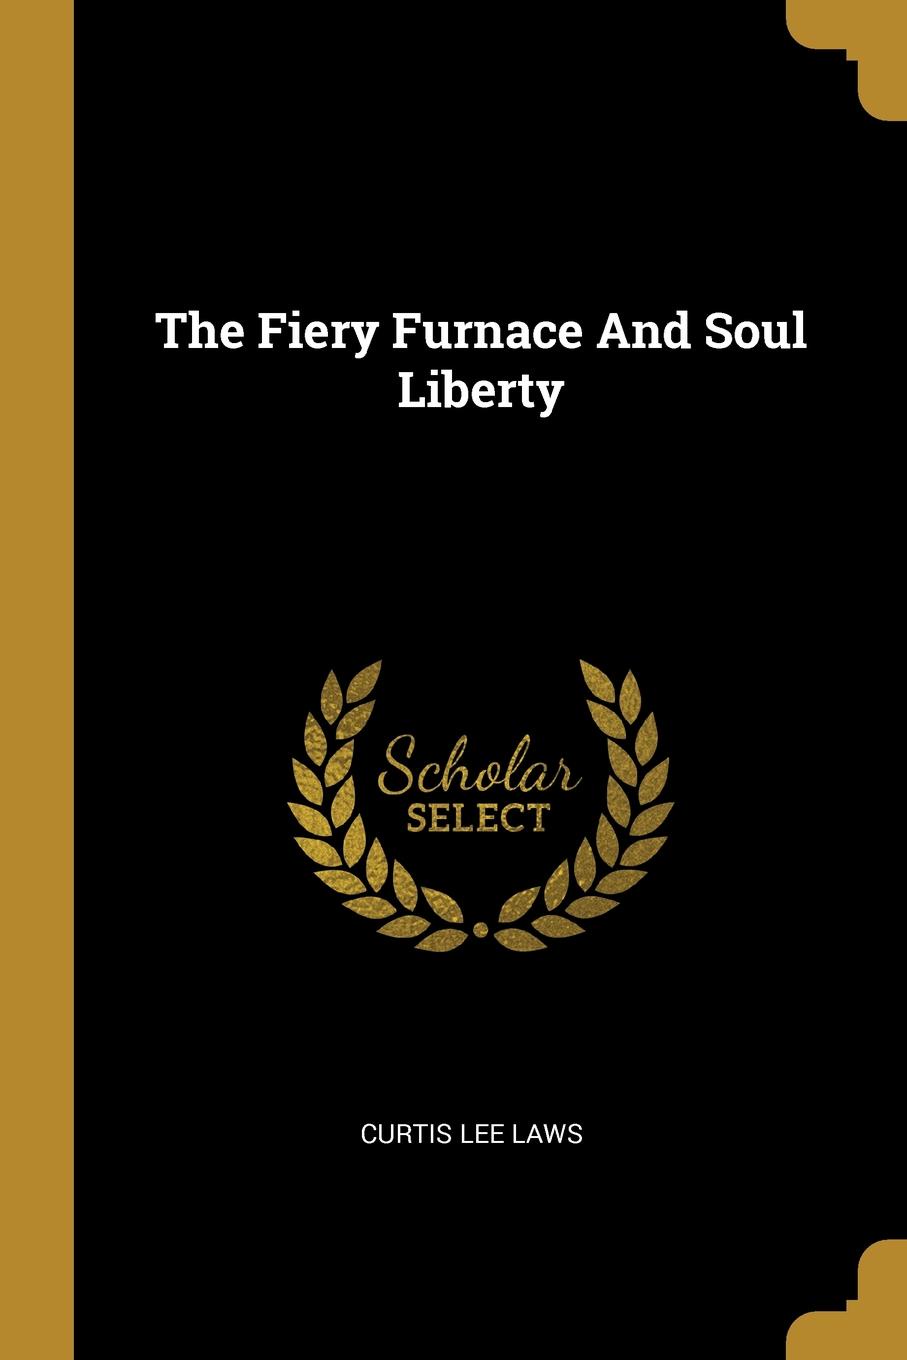 The Fiery Furnace And Soul Liberty